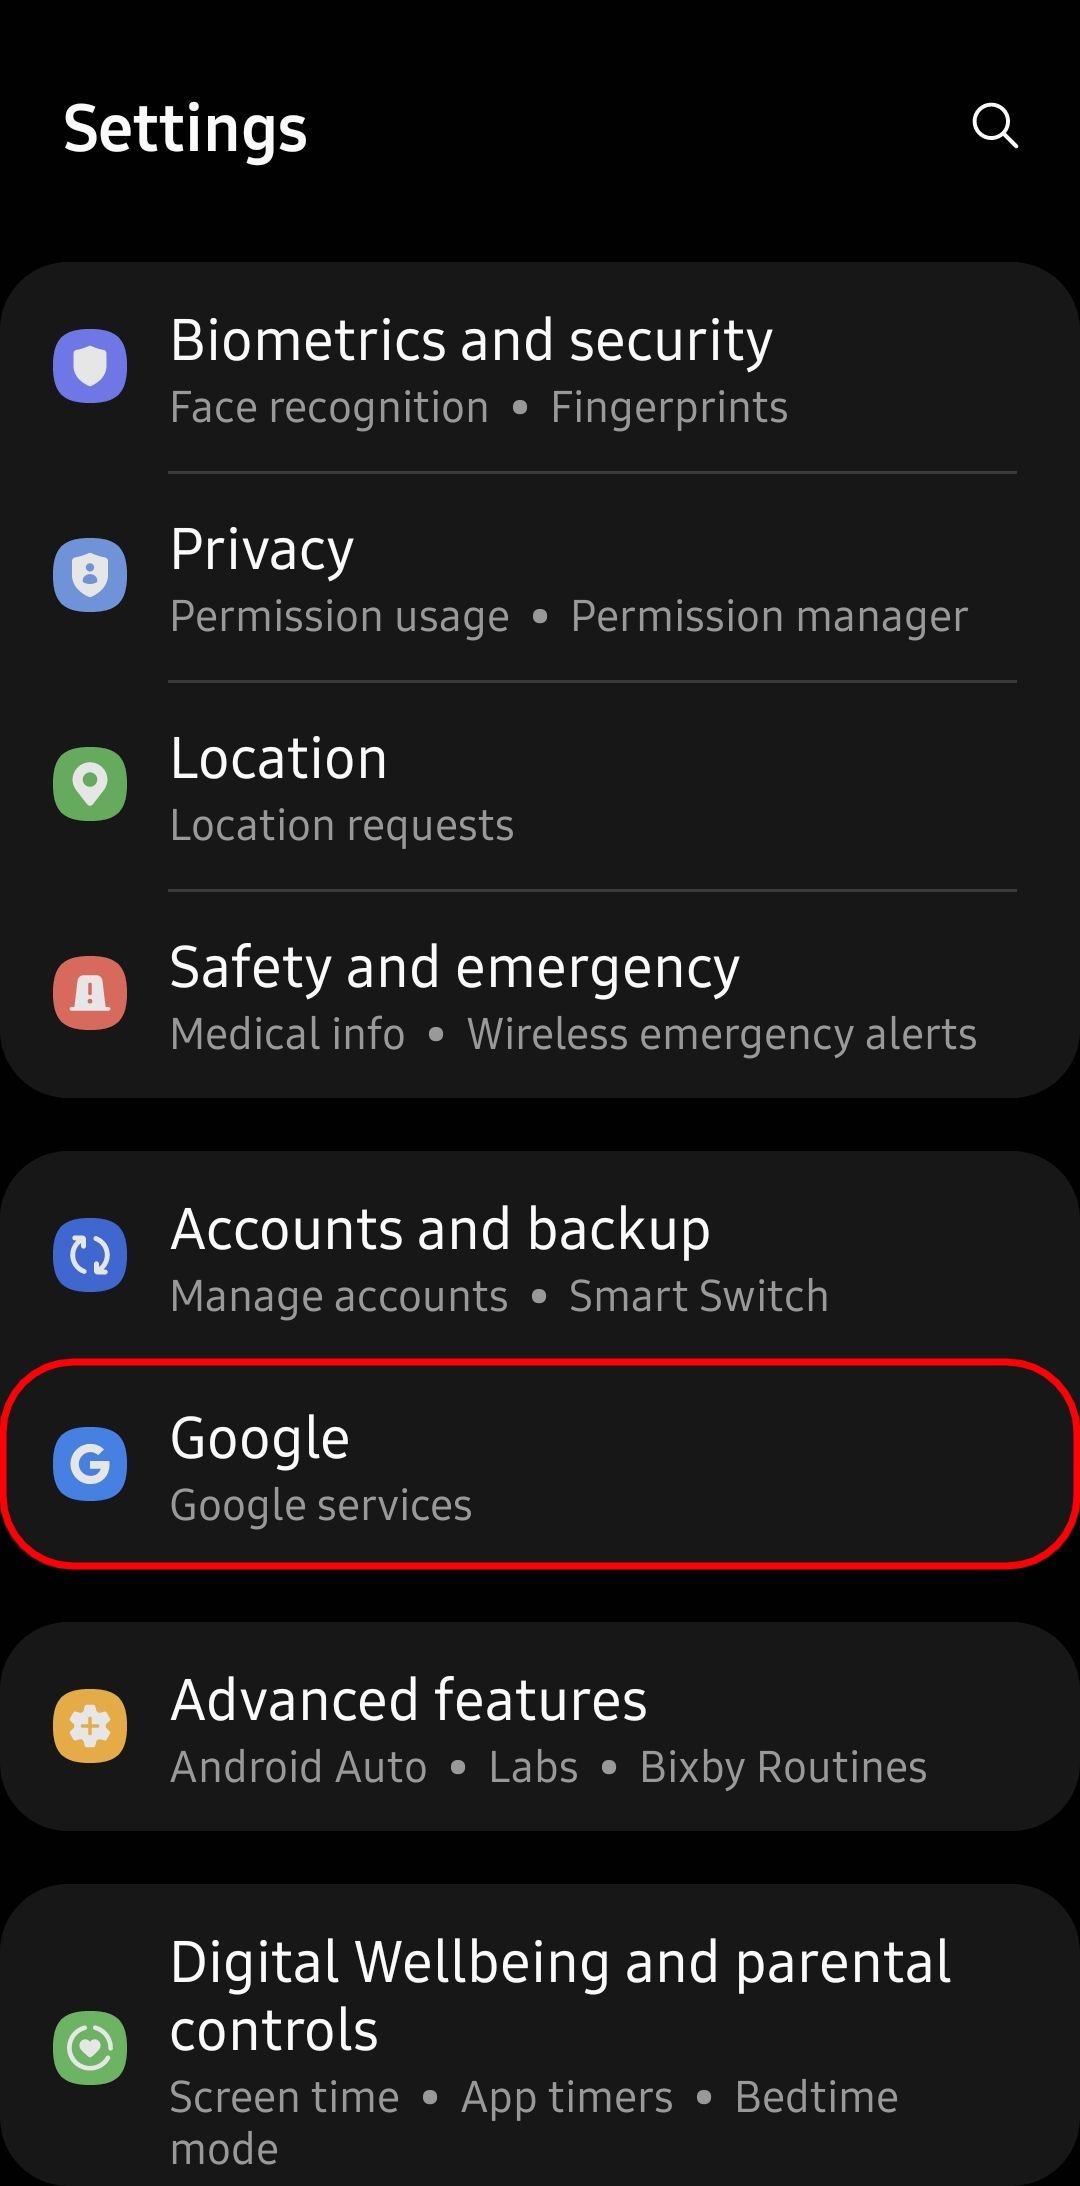 samsung main settings page with the google option highglighted